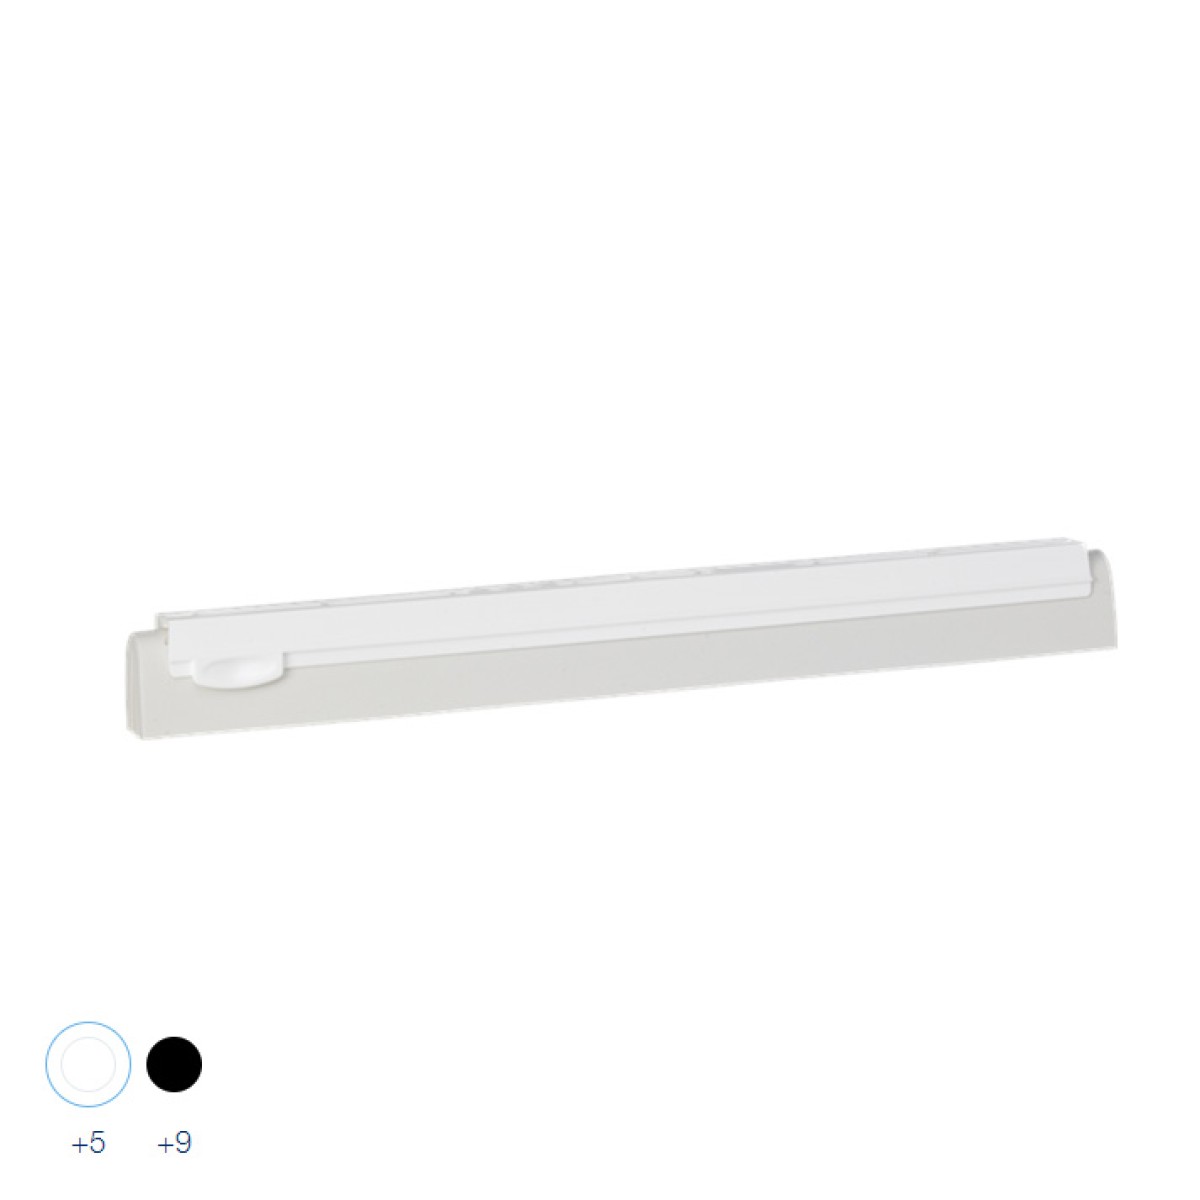 SQUEEGEE BLADE - 77735 WHITE 500mm